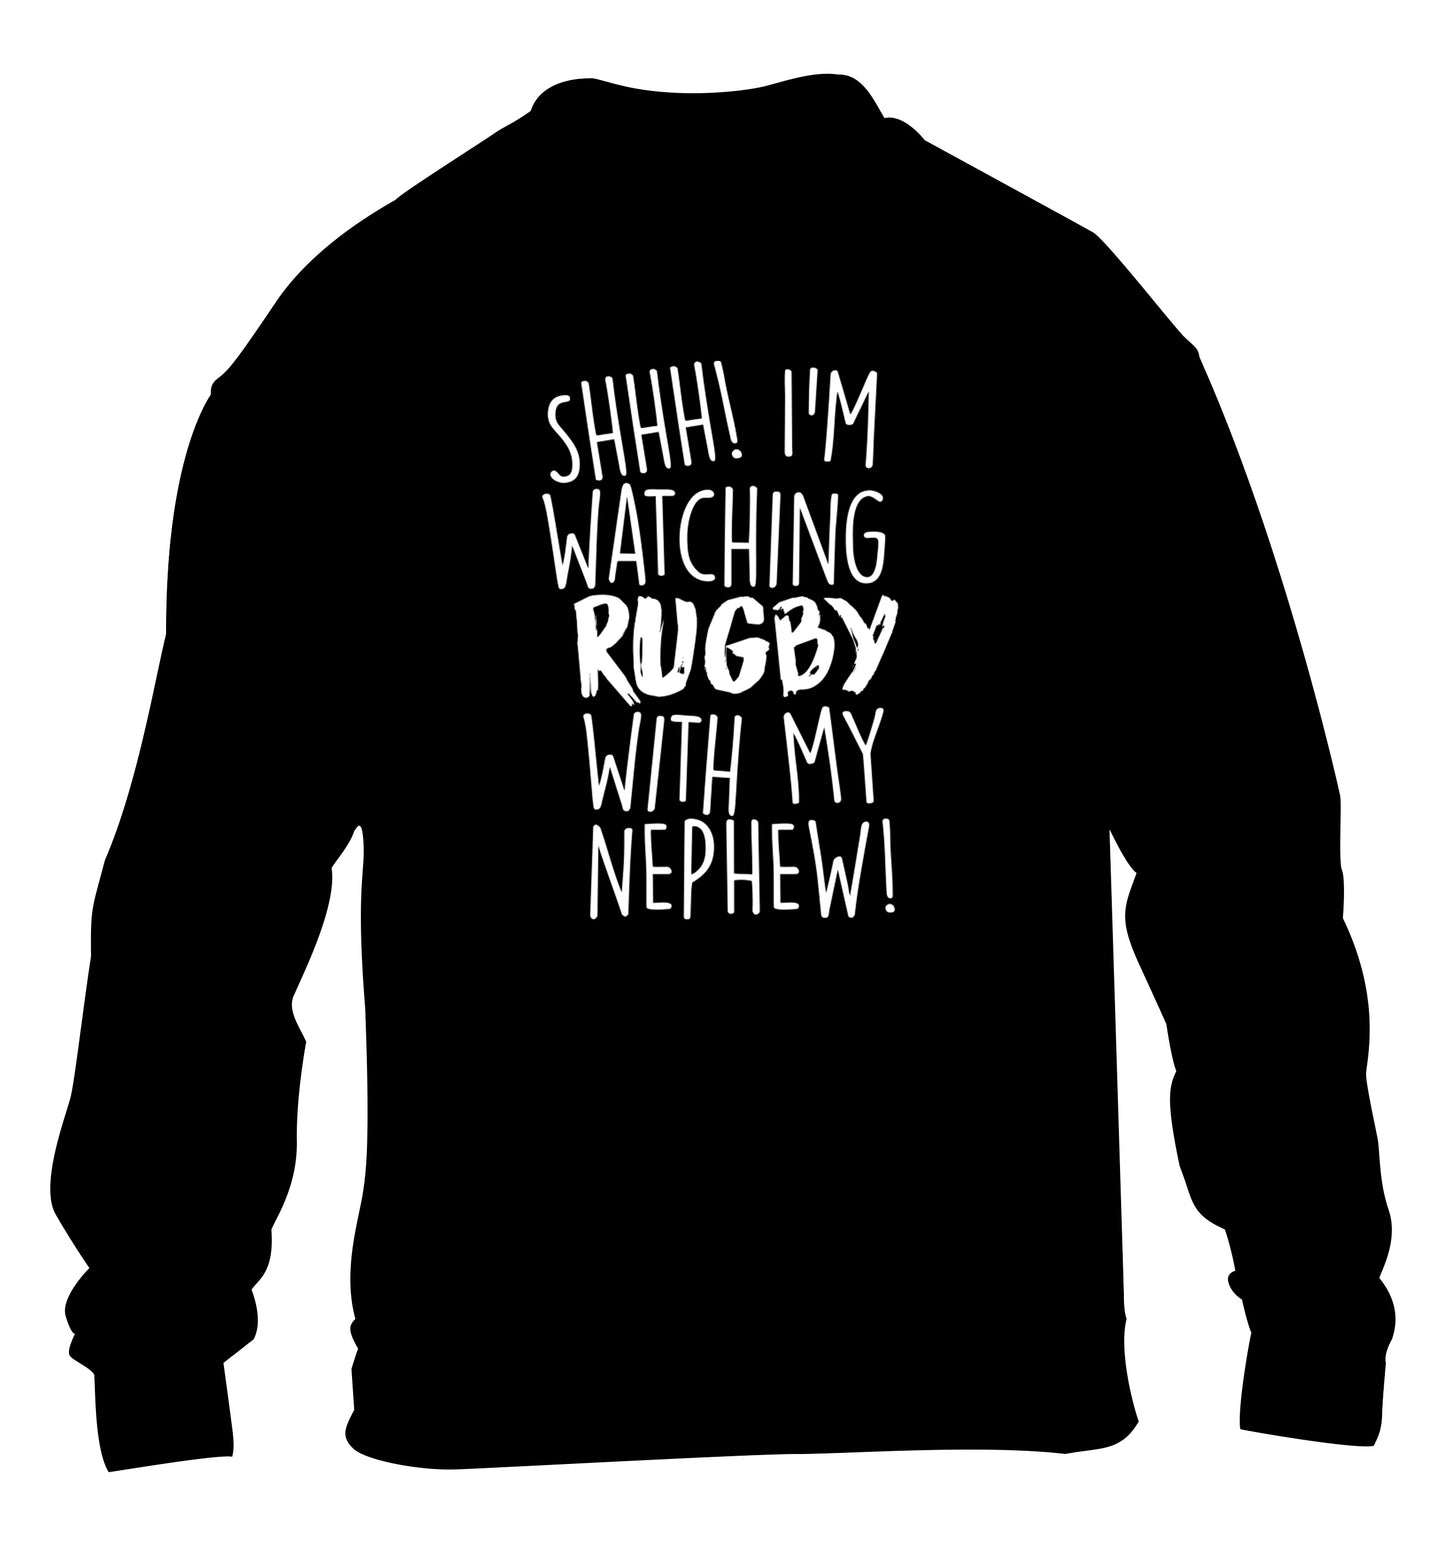 Shh.. I'm watching rugby with my nephew children's black sweater 12-13 Years